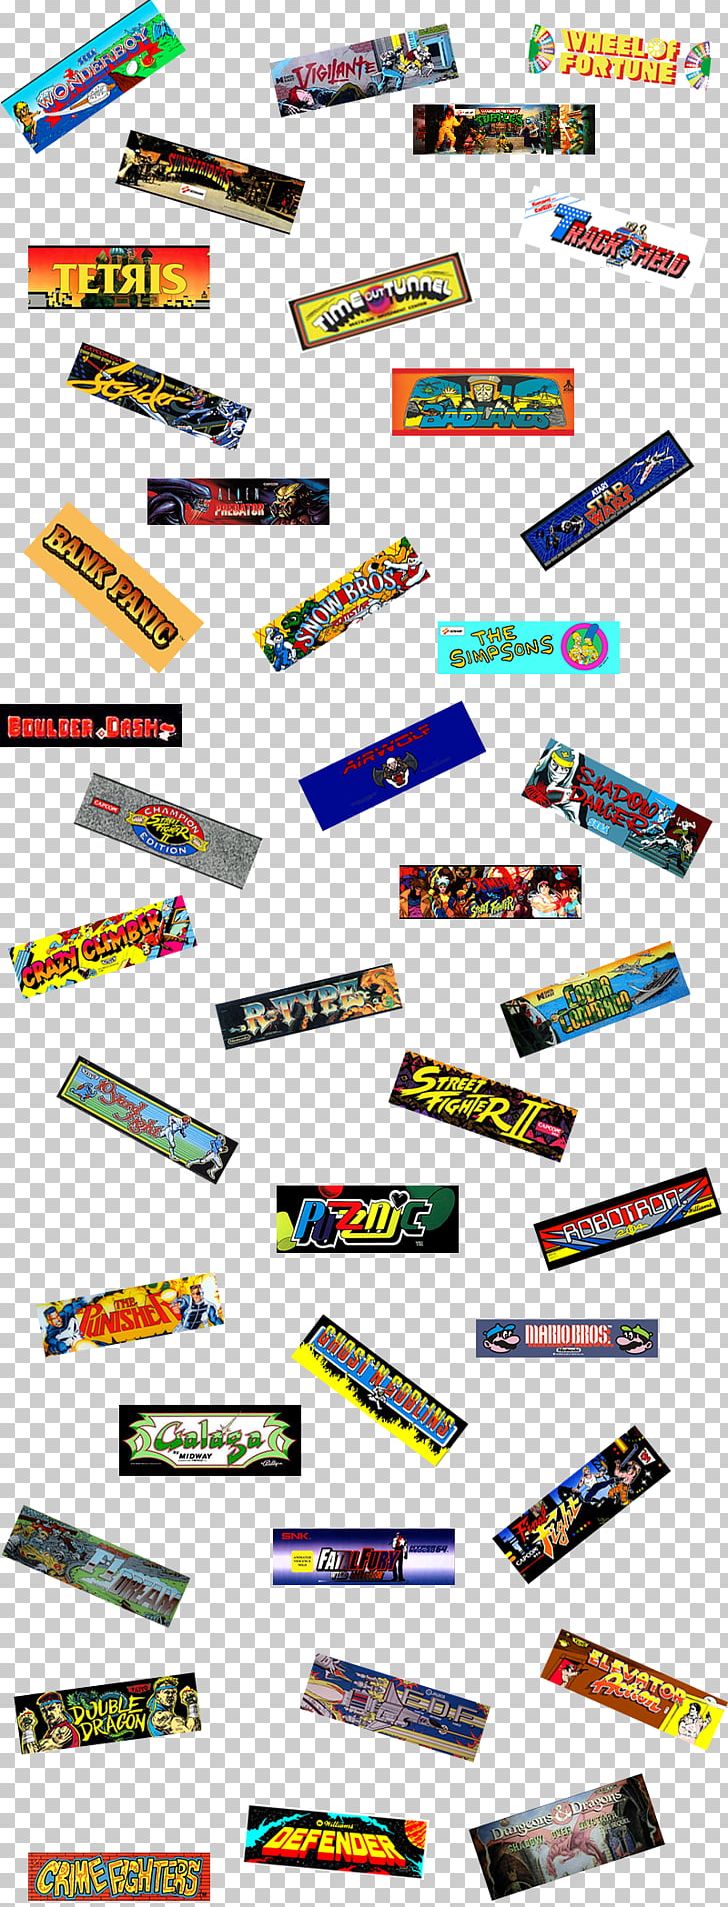 Line Technology Angle PNG, Clipart, Angle, Arcade Games, Art, Line, Technology Free PNG Download